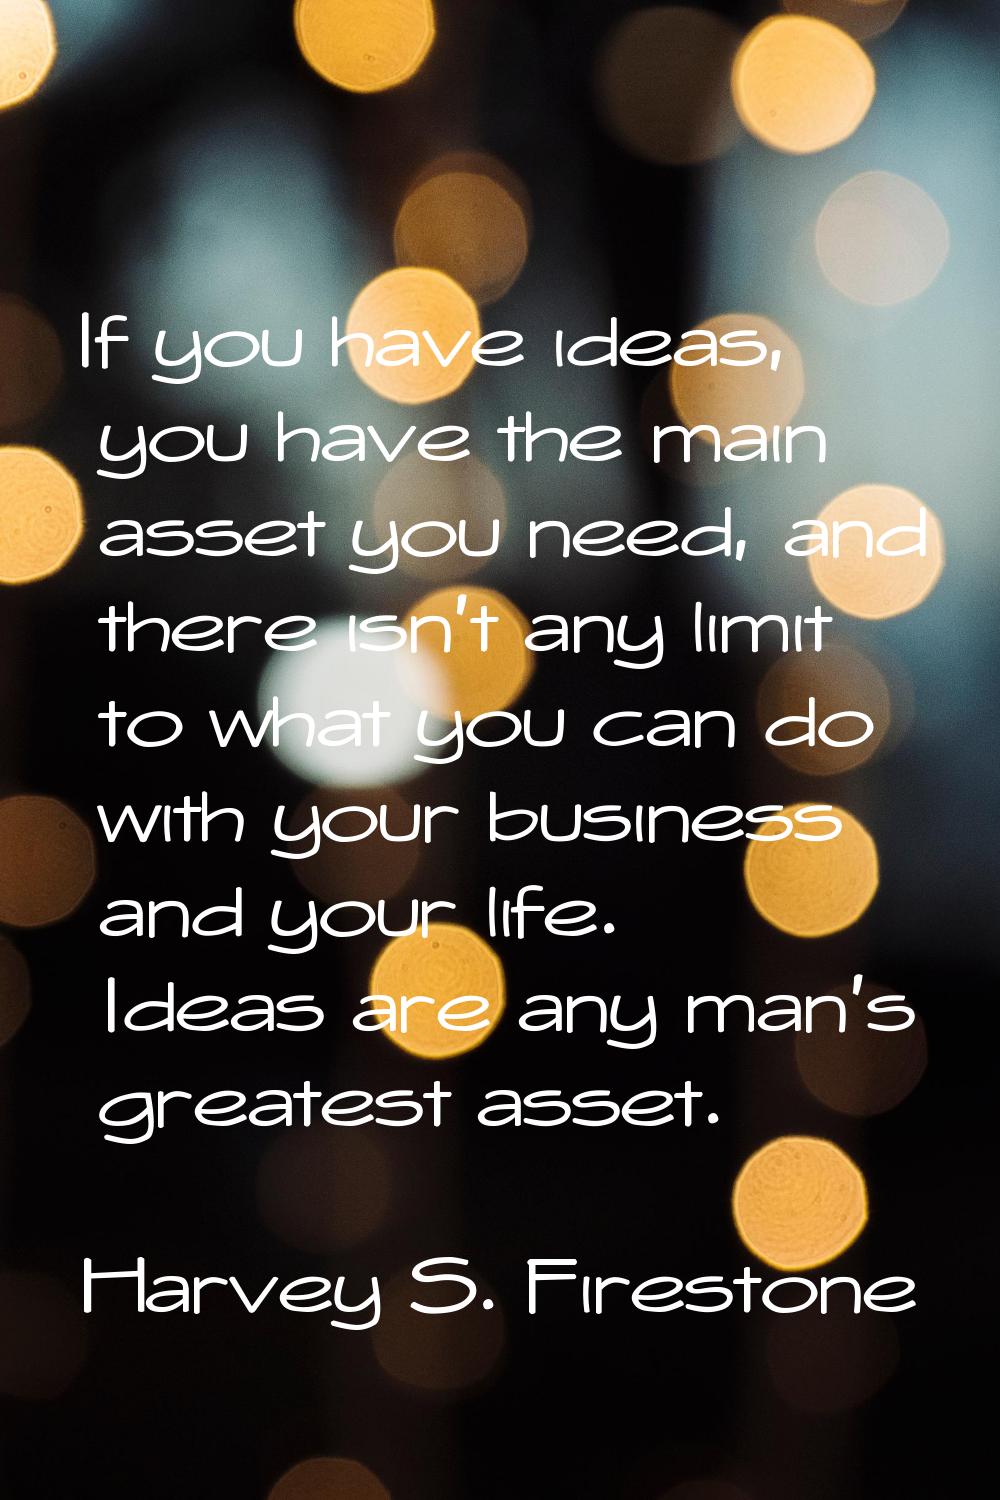 If you have ideas, you have the main asset you need, and there isn't any limit to what you can do w